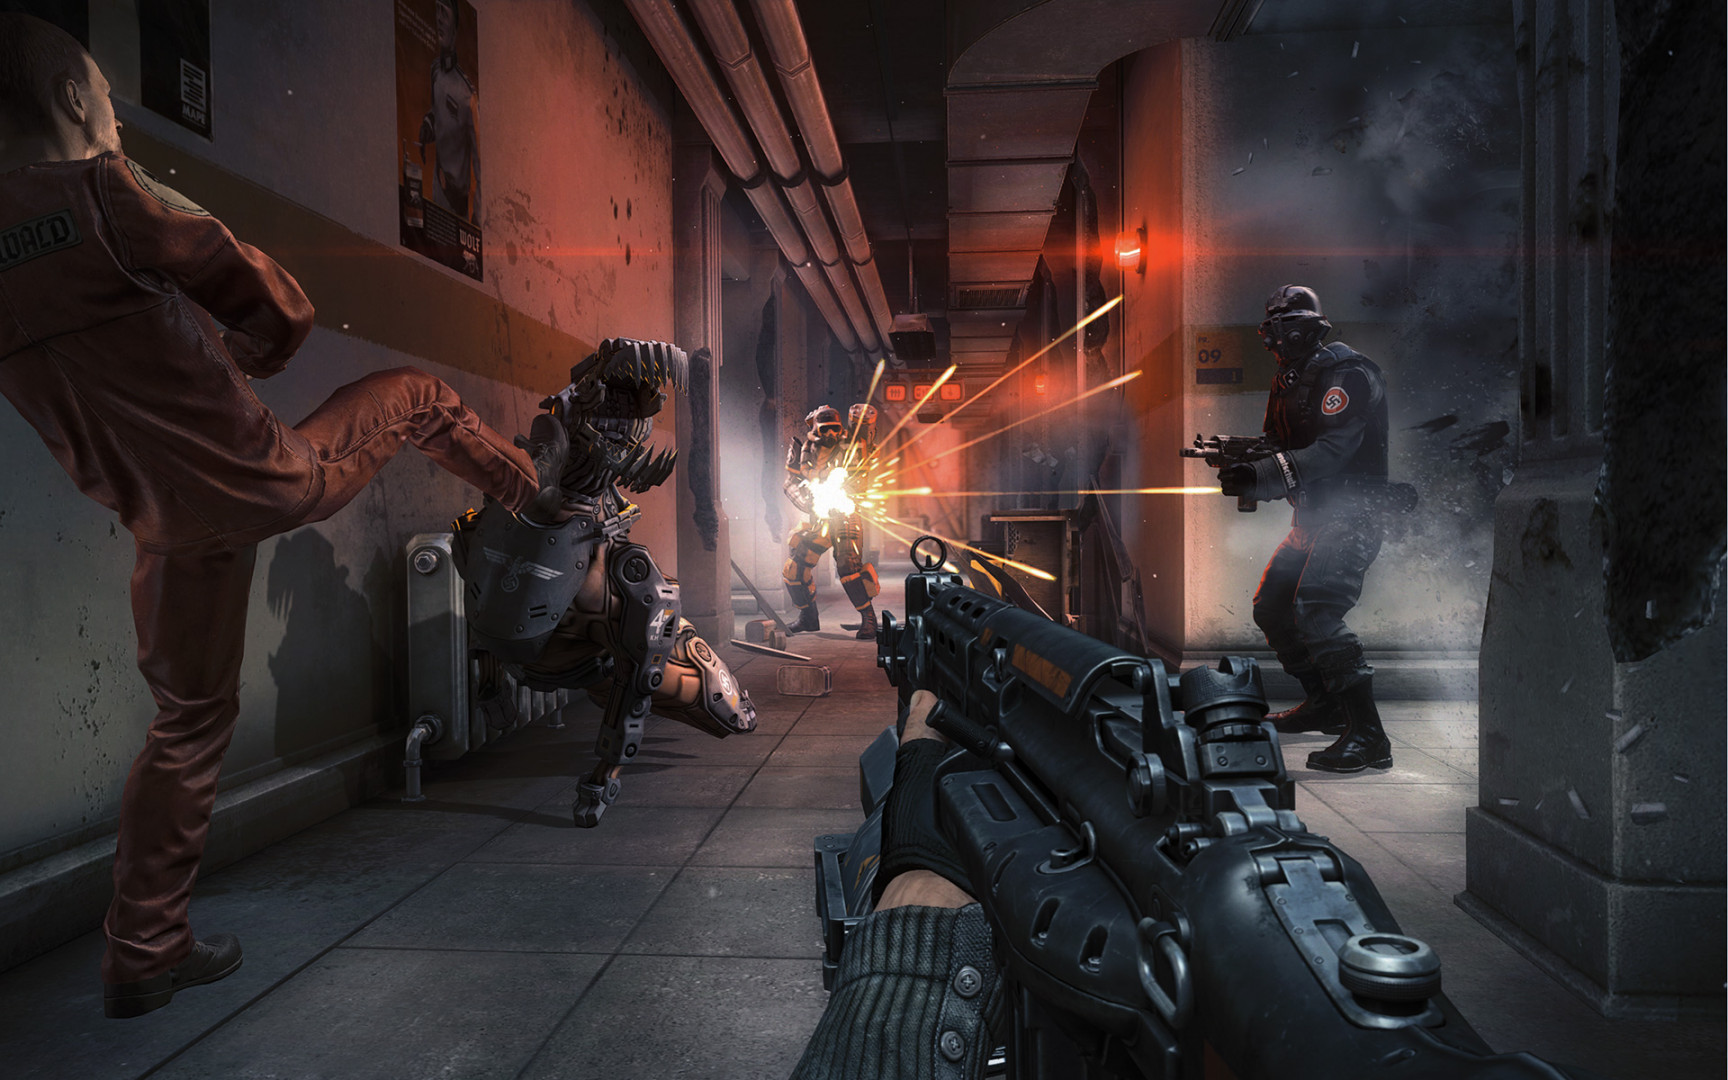 Wolfenstein: The New Order is Currently Free to Own in the Epic Games Store